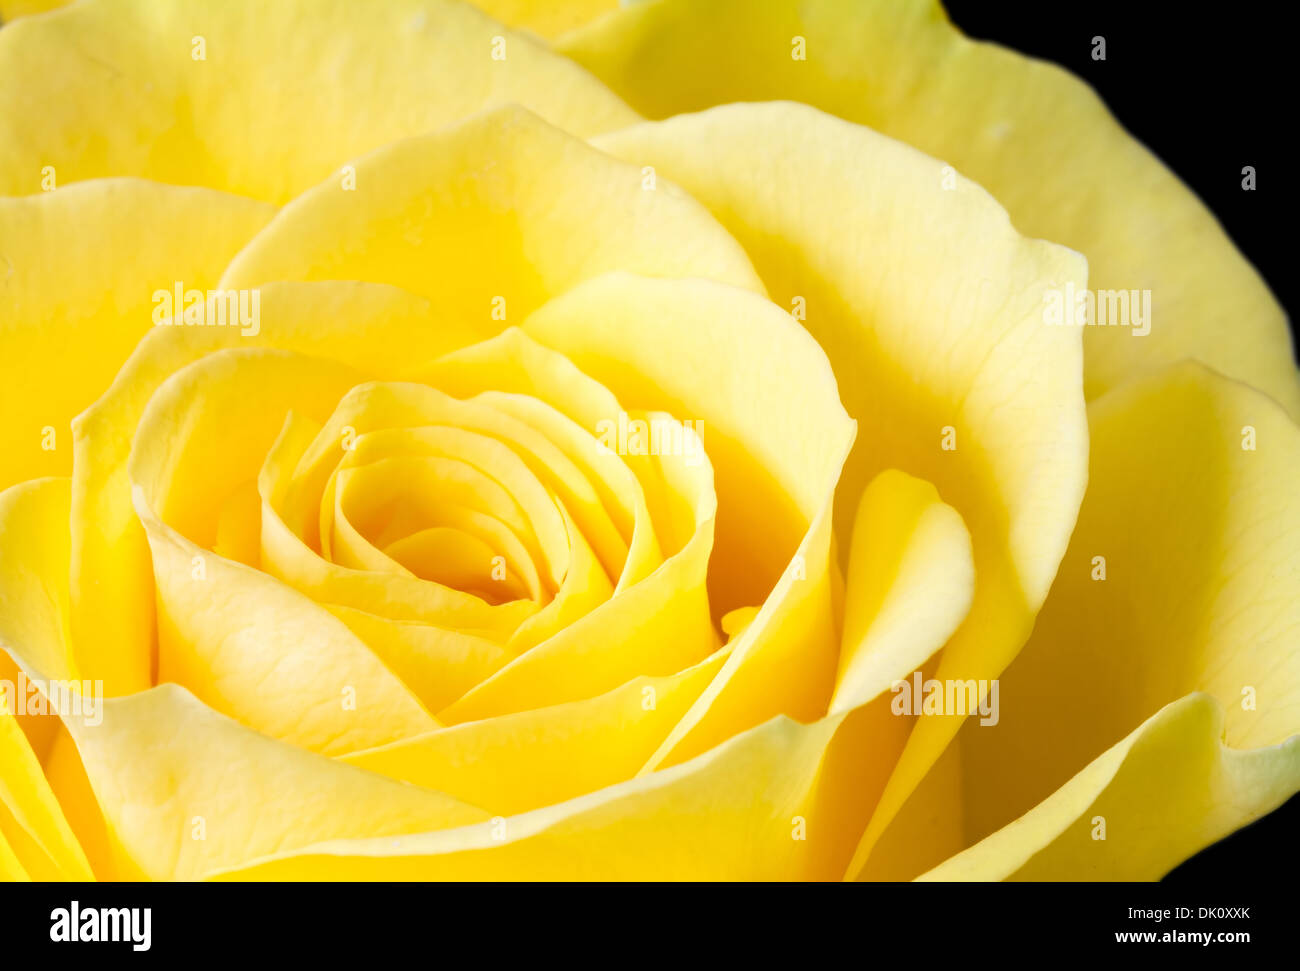 Close up image of yellow rose Banque D'Images